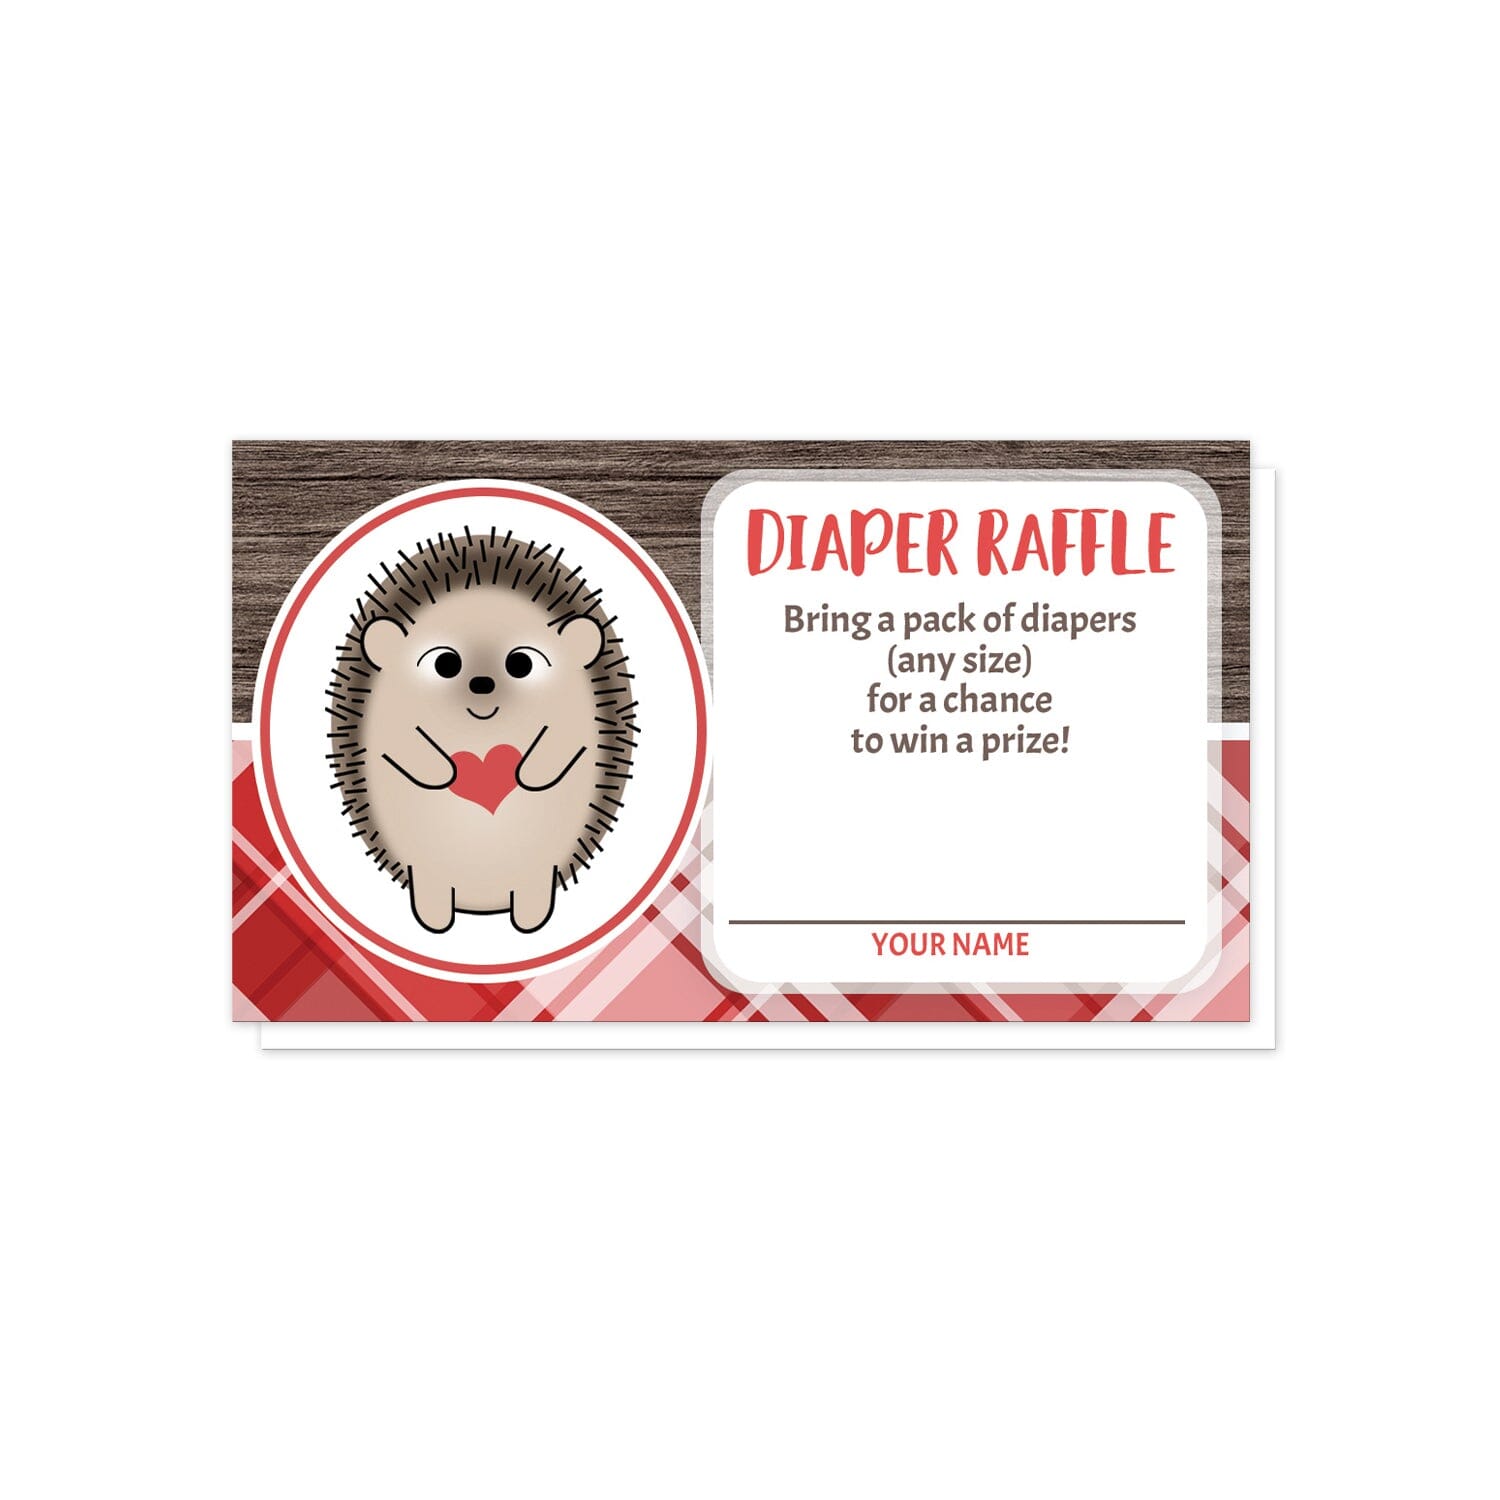 Rustic Hedgehog Heart Red Plaid Diaper Raffle Cards at Artistically Invited. Adorable rustic hedgehog red plaid diaper raffle cards illustrated with a cute and smiling hedgehog in a white and red oval on the left side over a rustic brown wood background along the top and a red plaid pattern background along the bottom. Your diaper raffle details are printed in red and brown in a white rectangular area over the background design on the right side.